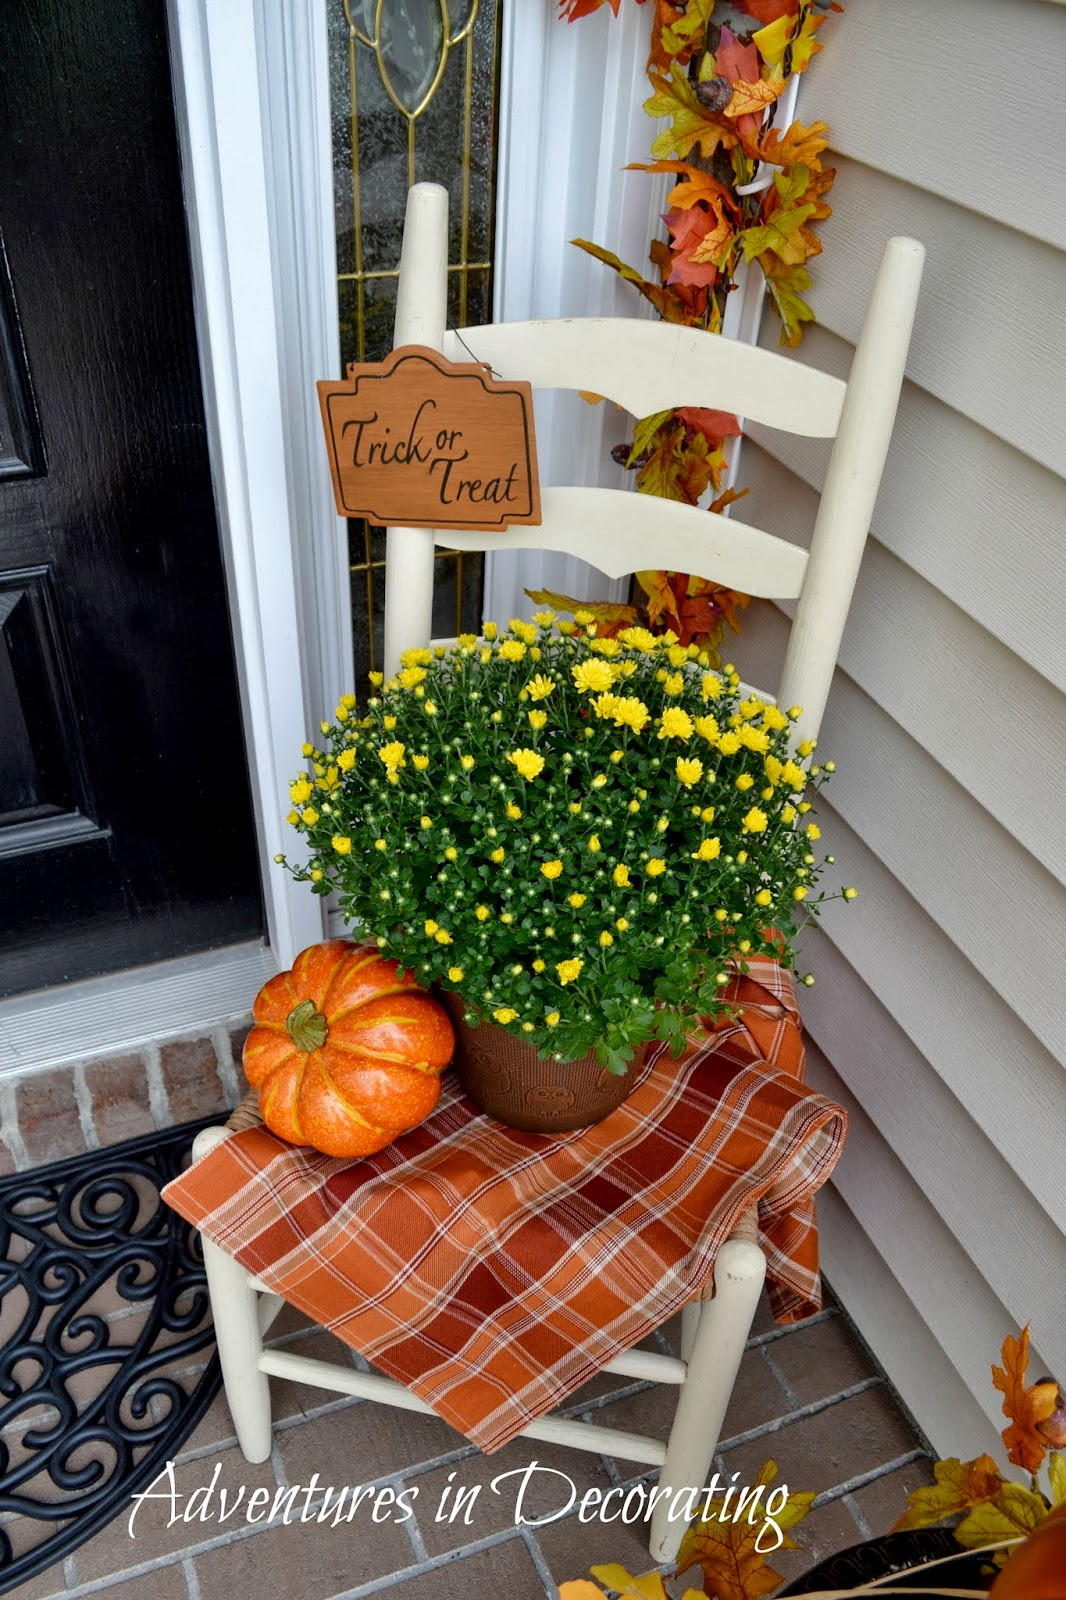 Fall Porch Decor
 Adventures in Decorating Our Fall Front Porch